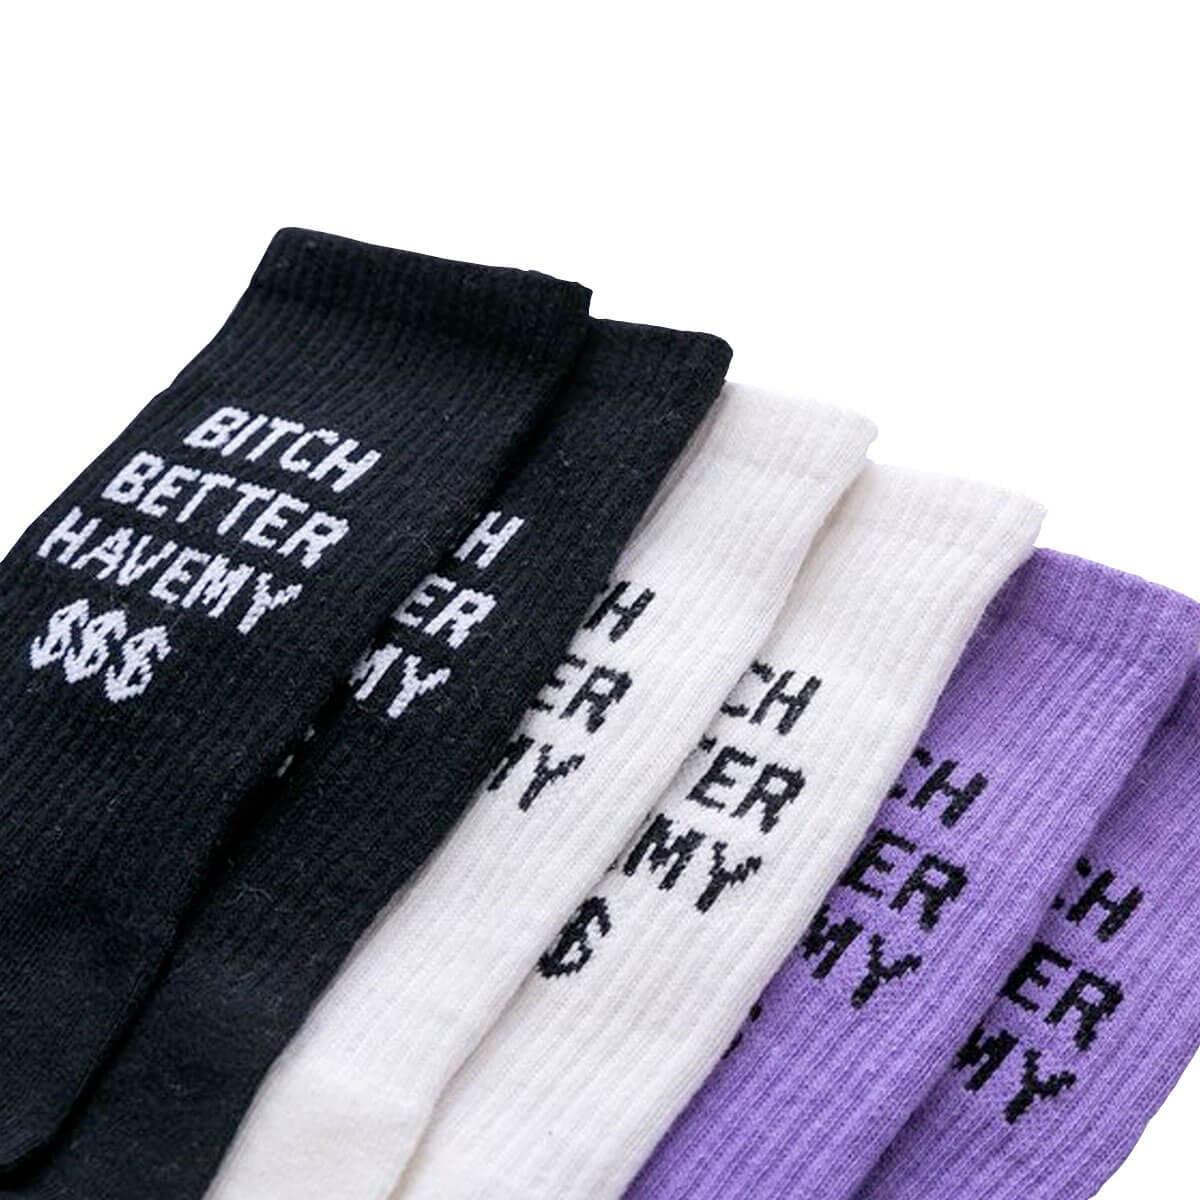 On-Streets Better Have My Money Fashion Cotton Socks